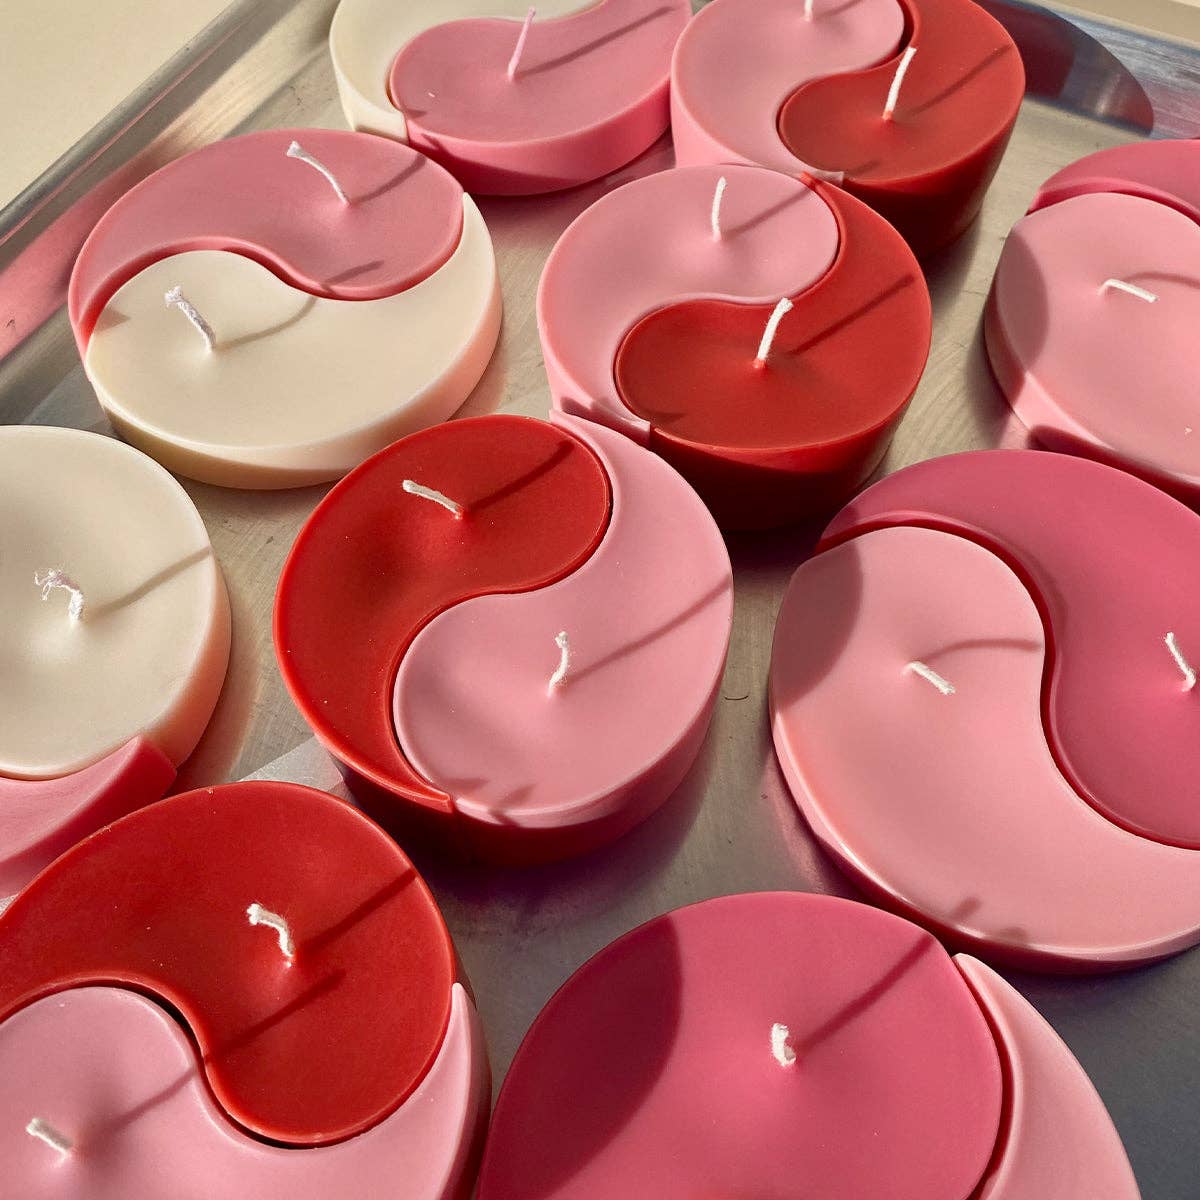 Scandles - Yin Yang Candle - Red/Pink H: 2” W: 4”